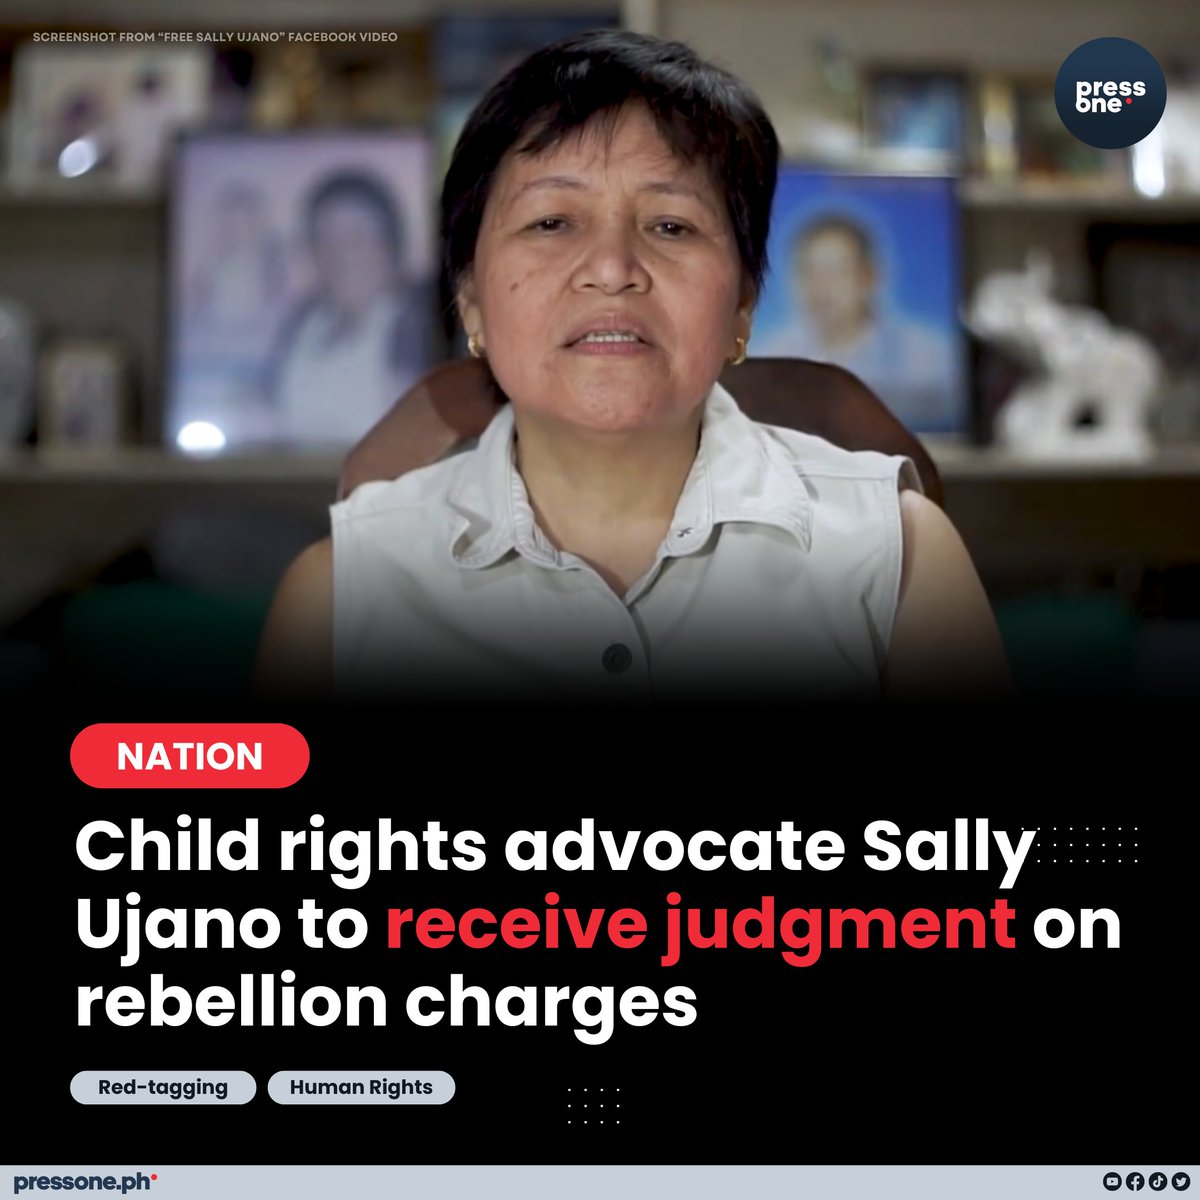 Child rights and anti-human trafficking advocate, Maria Salome Crisostomo Ujano, anticipates the promulgation of judgment on Thursday, May 16, concerning the rebellion charges brought against her. #PressOnePH